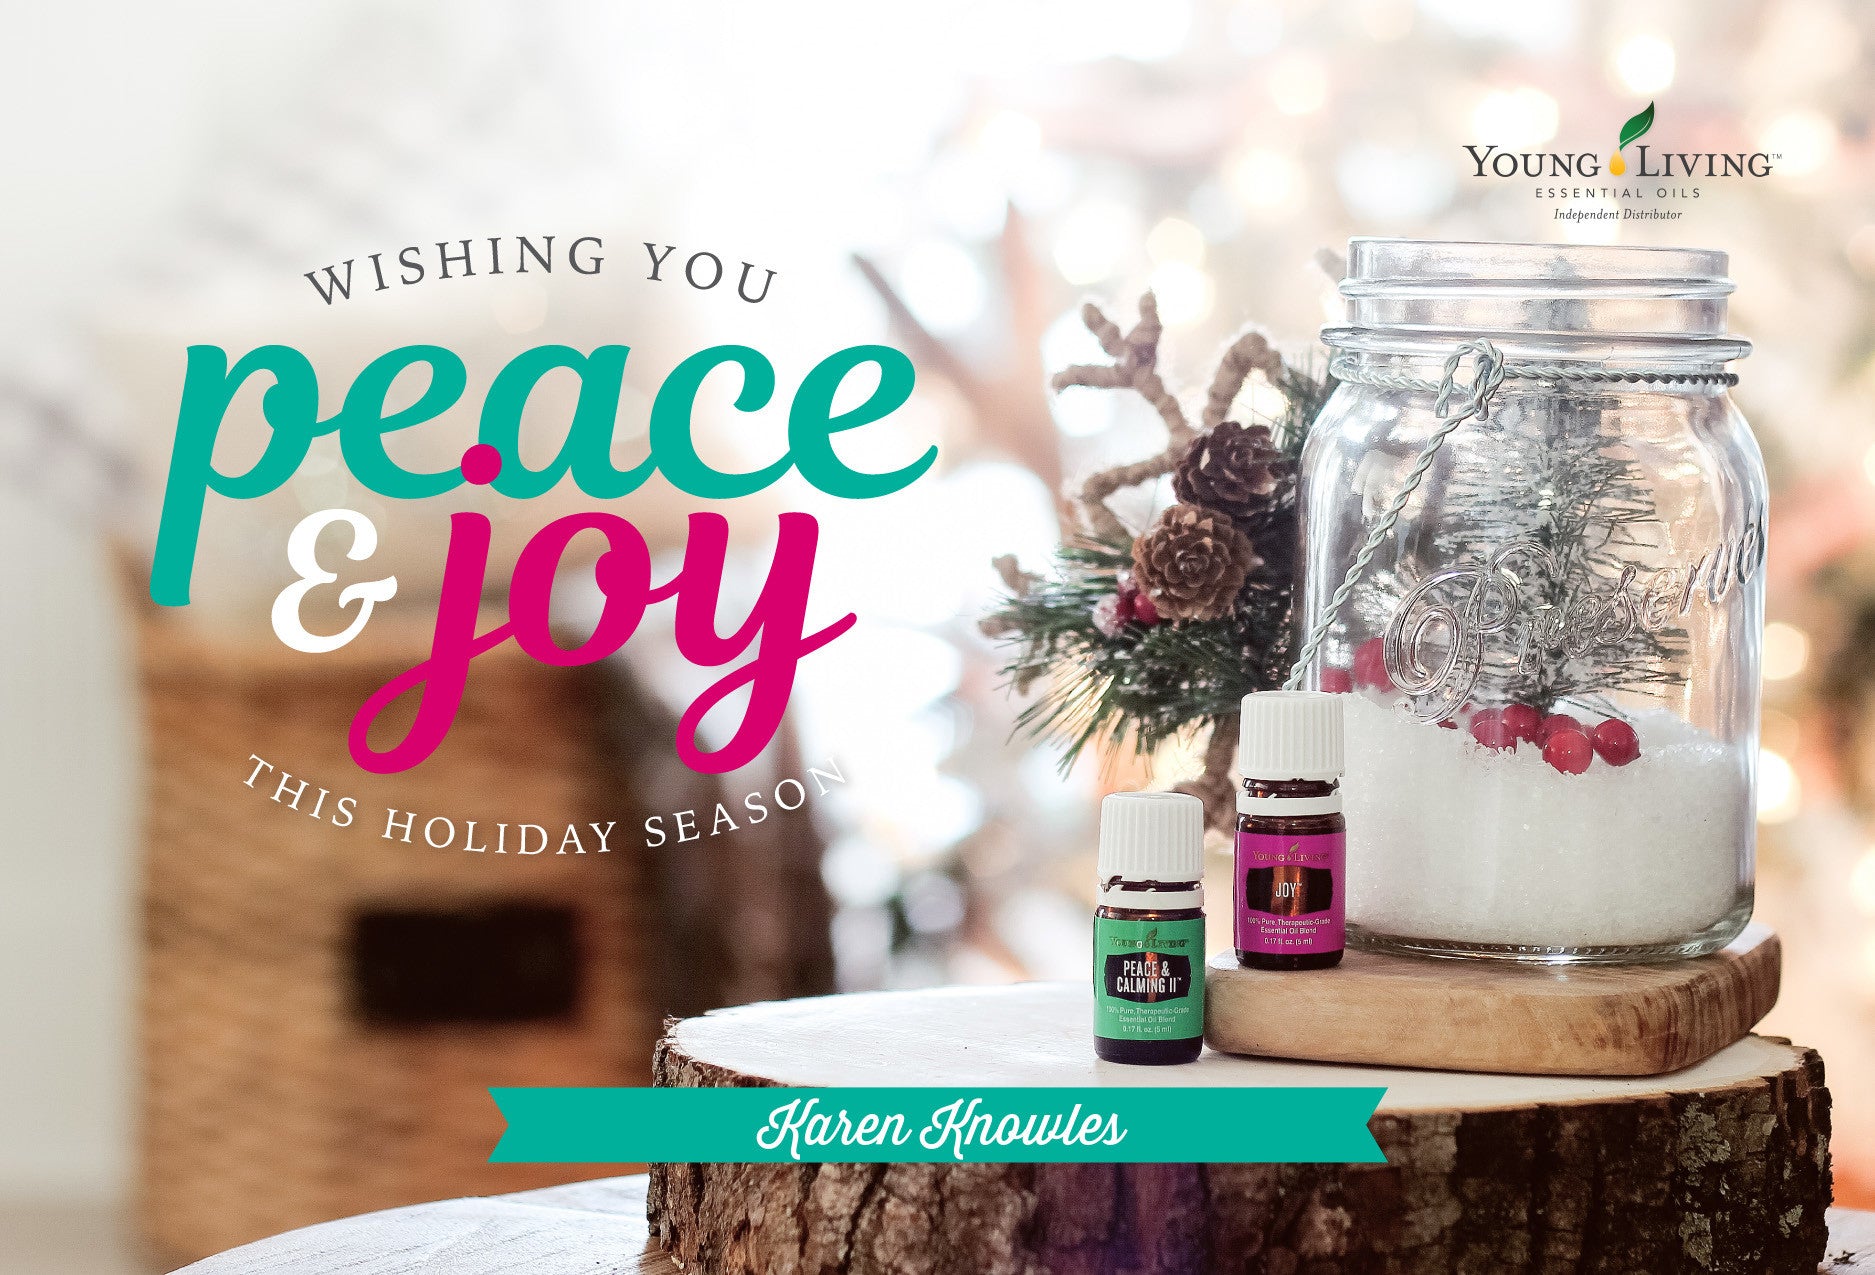 Holiday Essential Oils 'Make and Take' Recipes Make the Best Gifts!